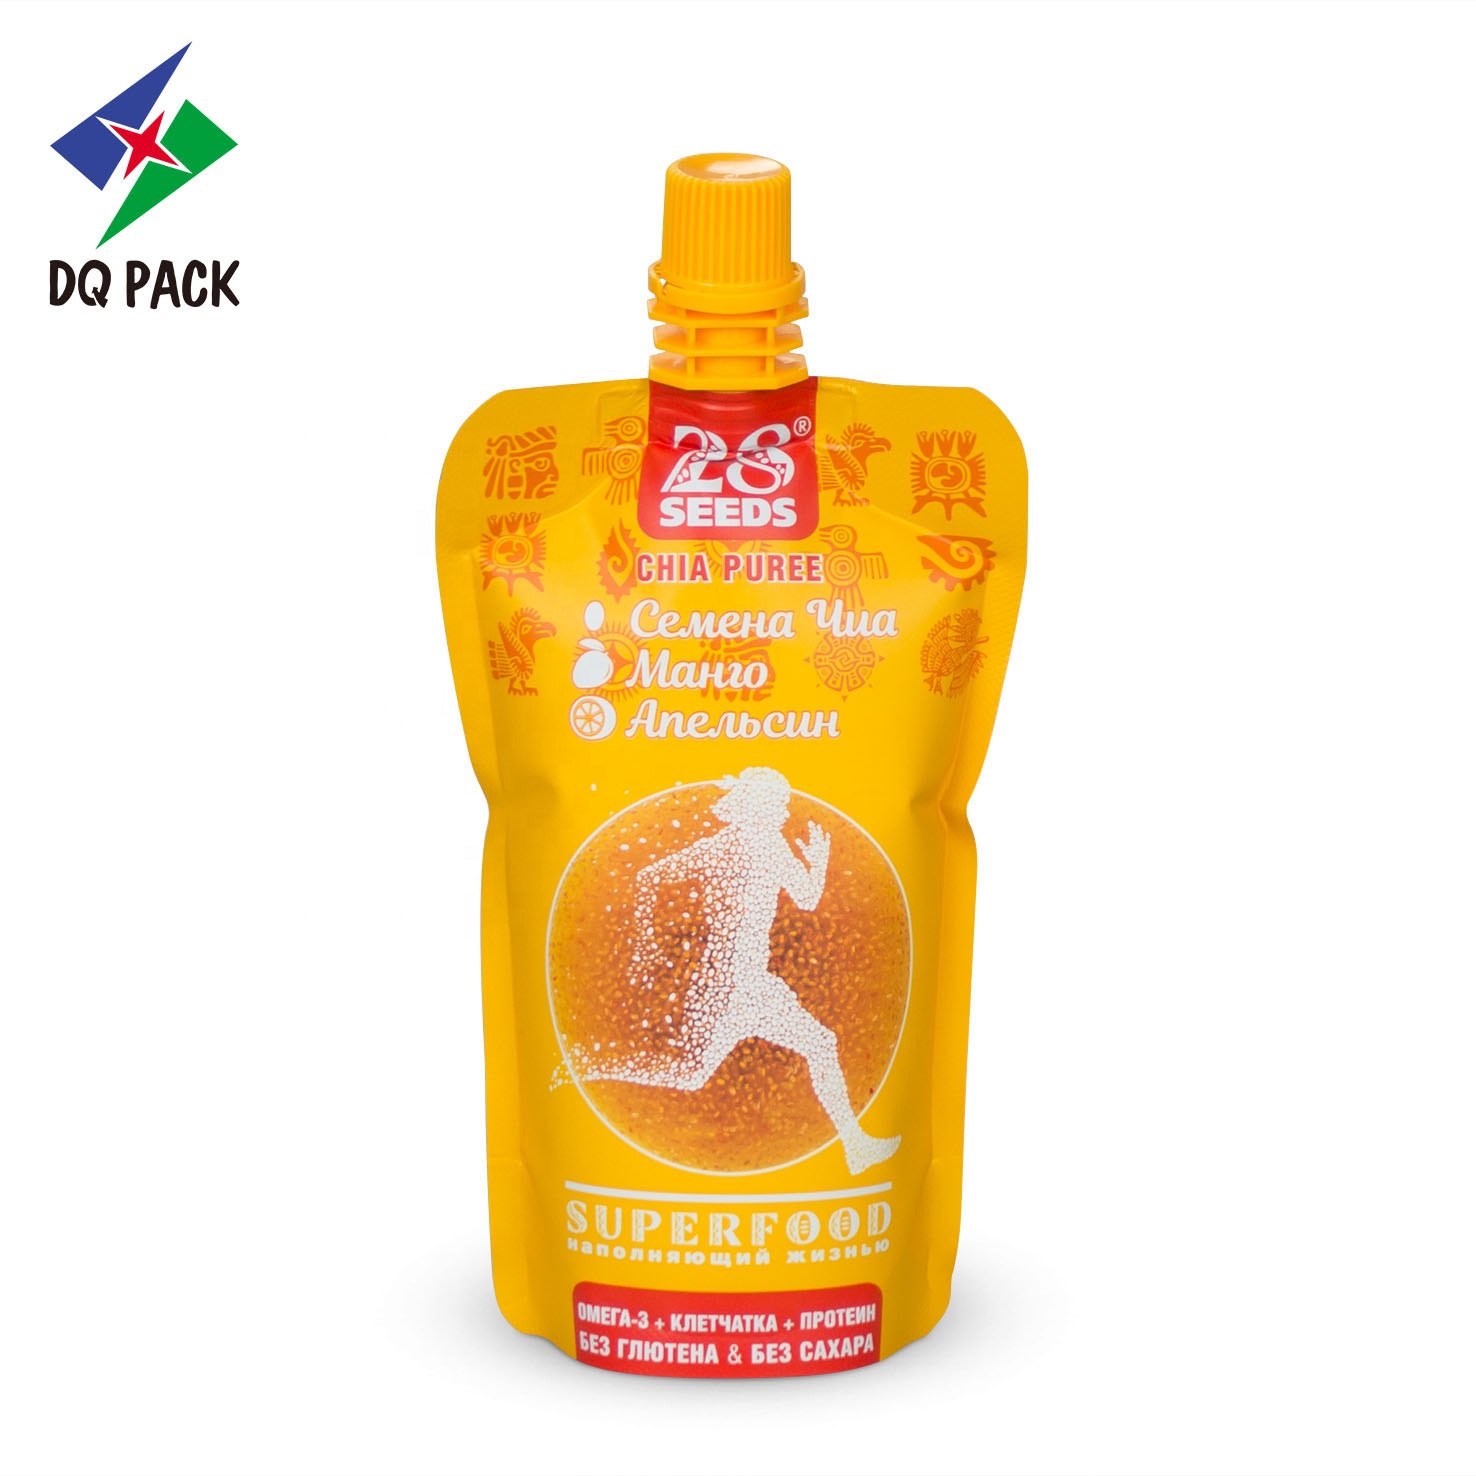 DQ PACK Wholesale BPA Free Ecofriendly Plastic Mylar Pouch Bag Doypack with spout for Liquid drink juice food packaging